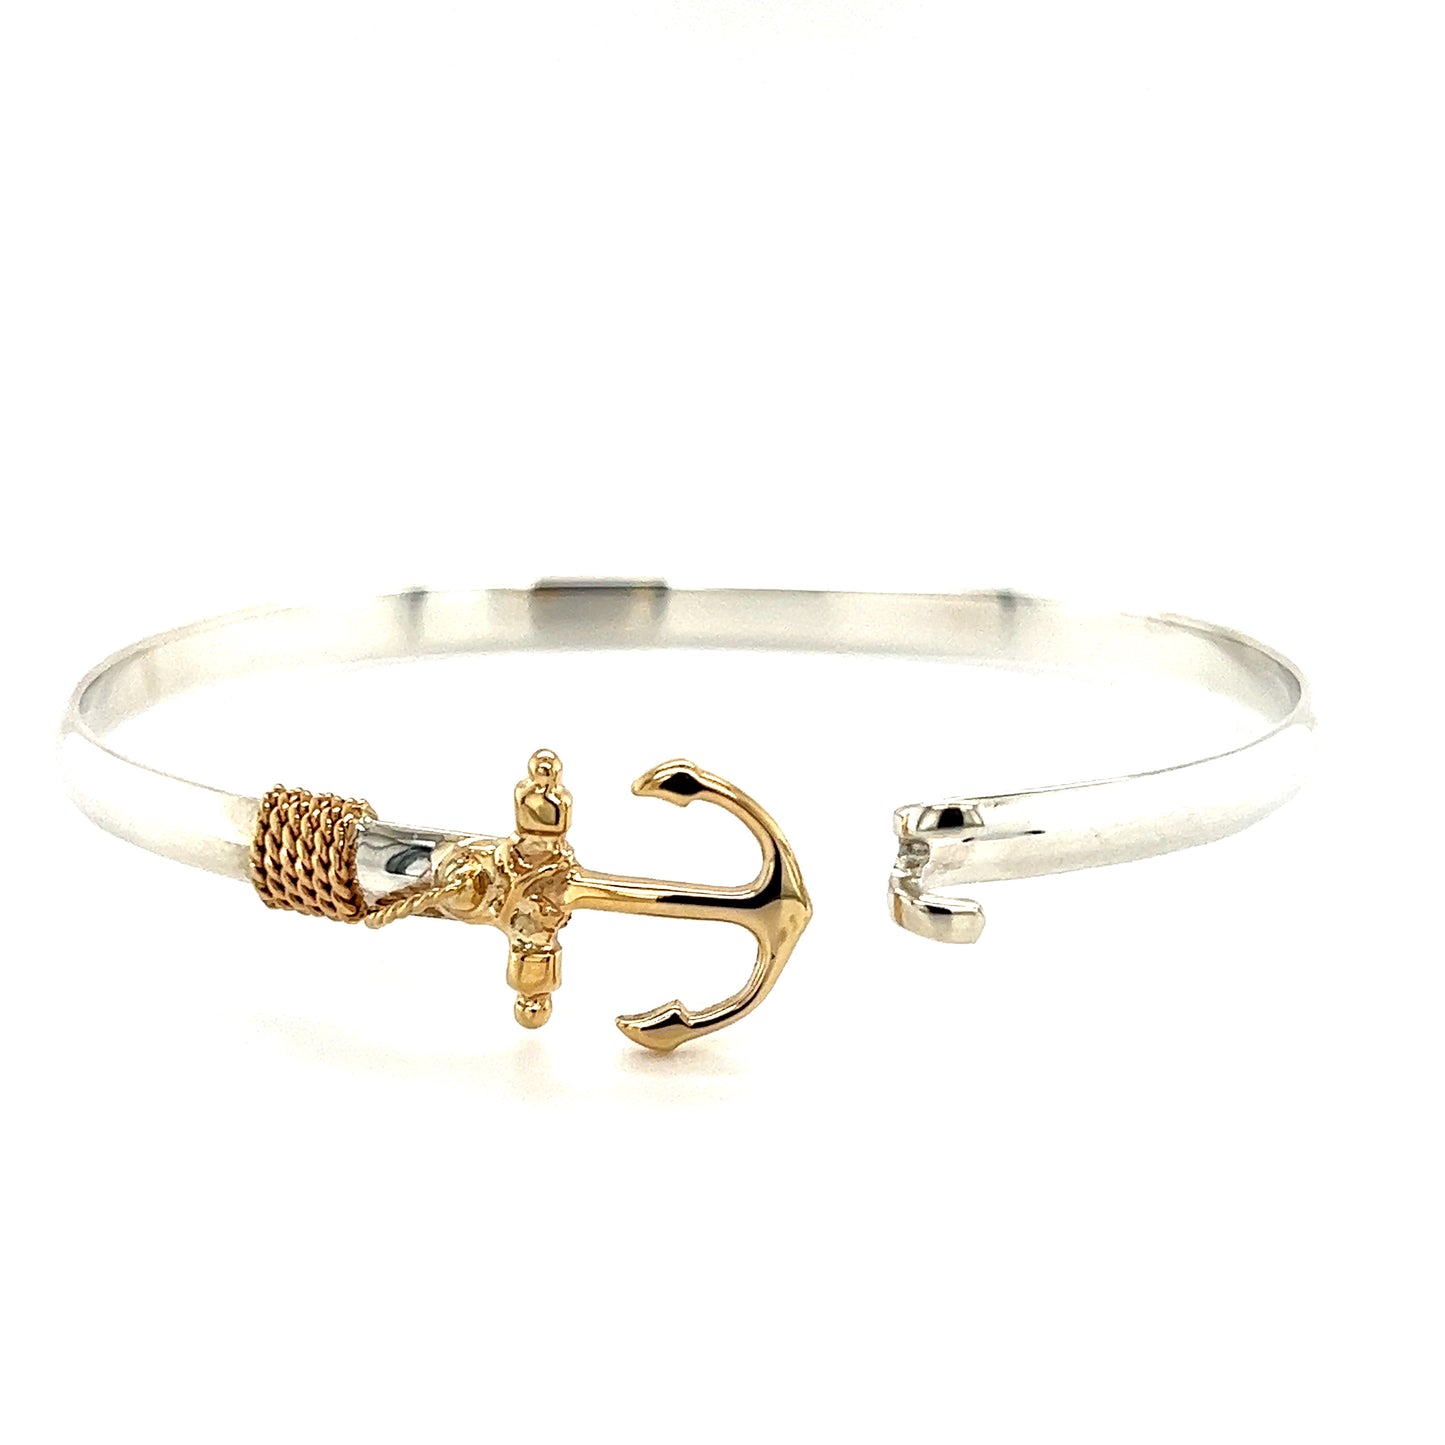 Flat 4mm Bangle Bracelet with 14K Yellow Gold Anchor and Wrap in Sterling Silver Flat Front View withOpen Clasp